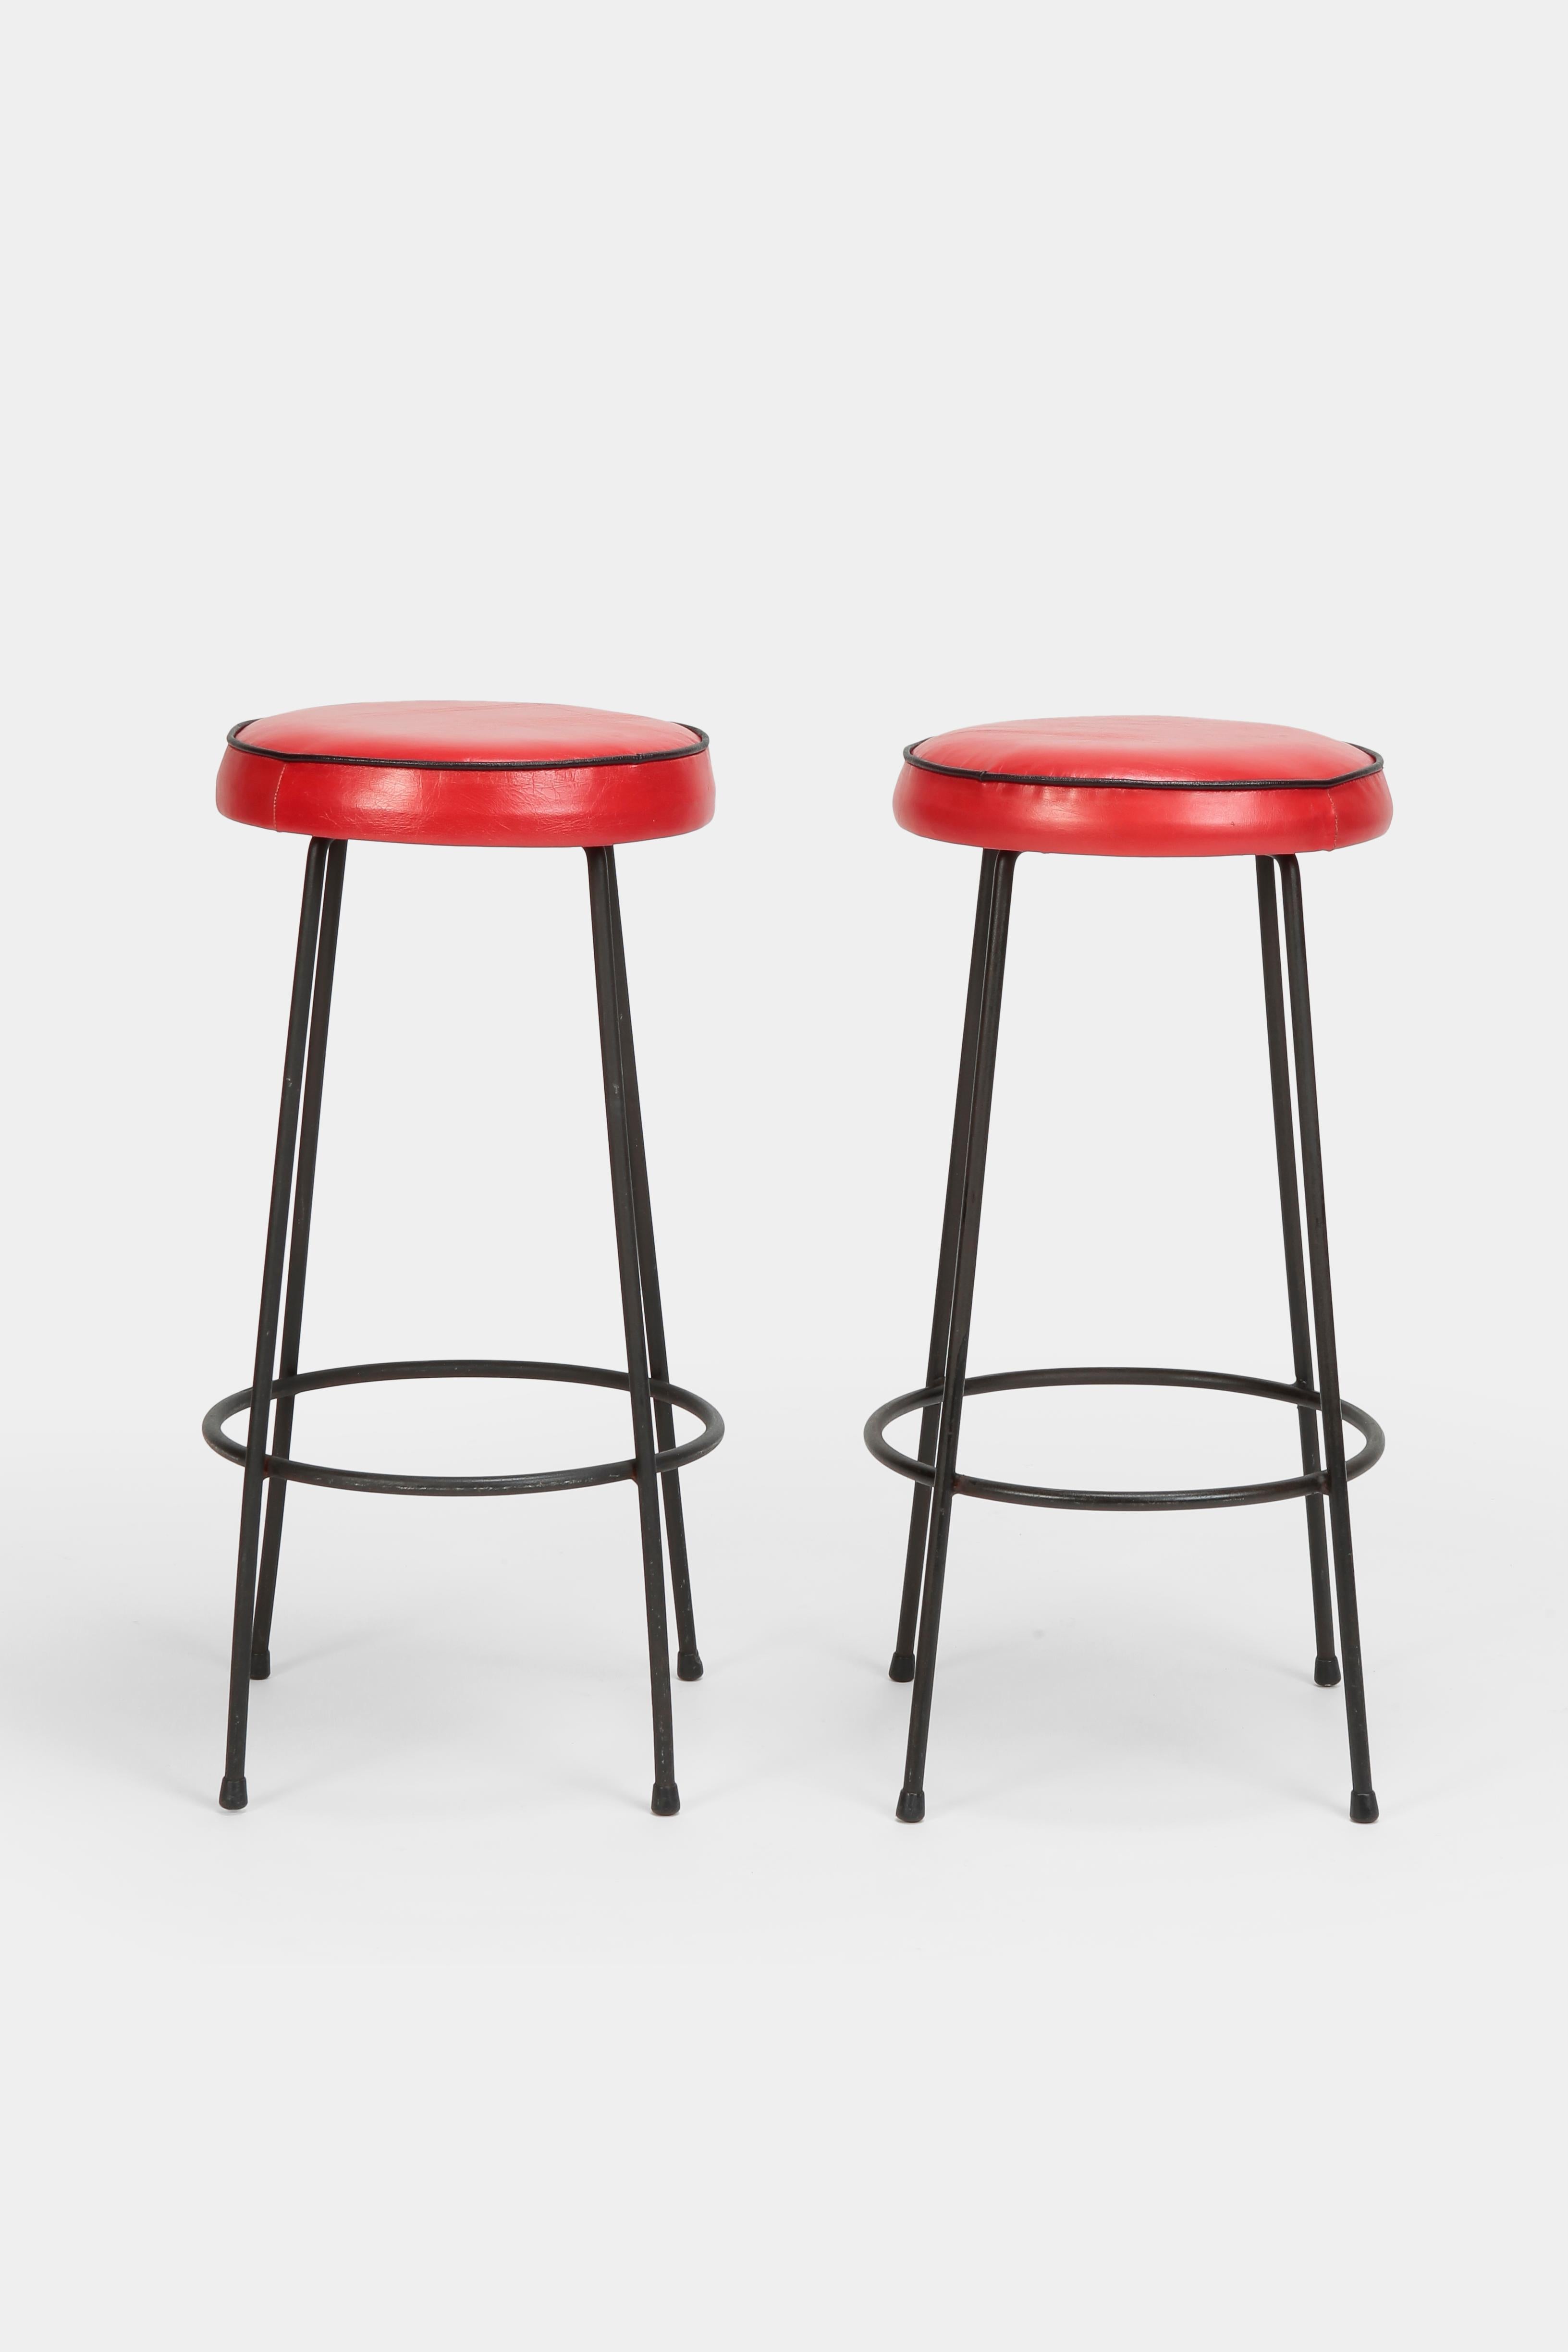 Mid-Century Modern 2 Bar Stools Red Leather Italy, 1950s